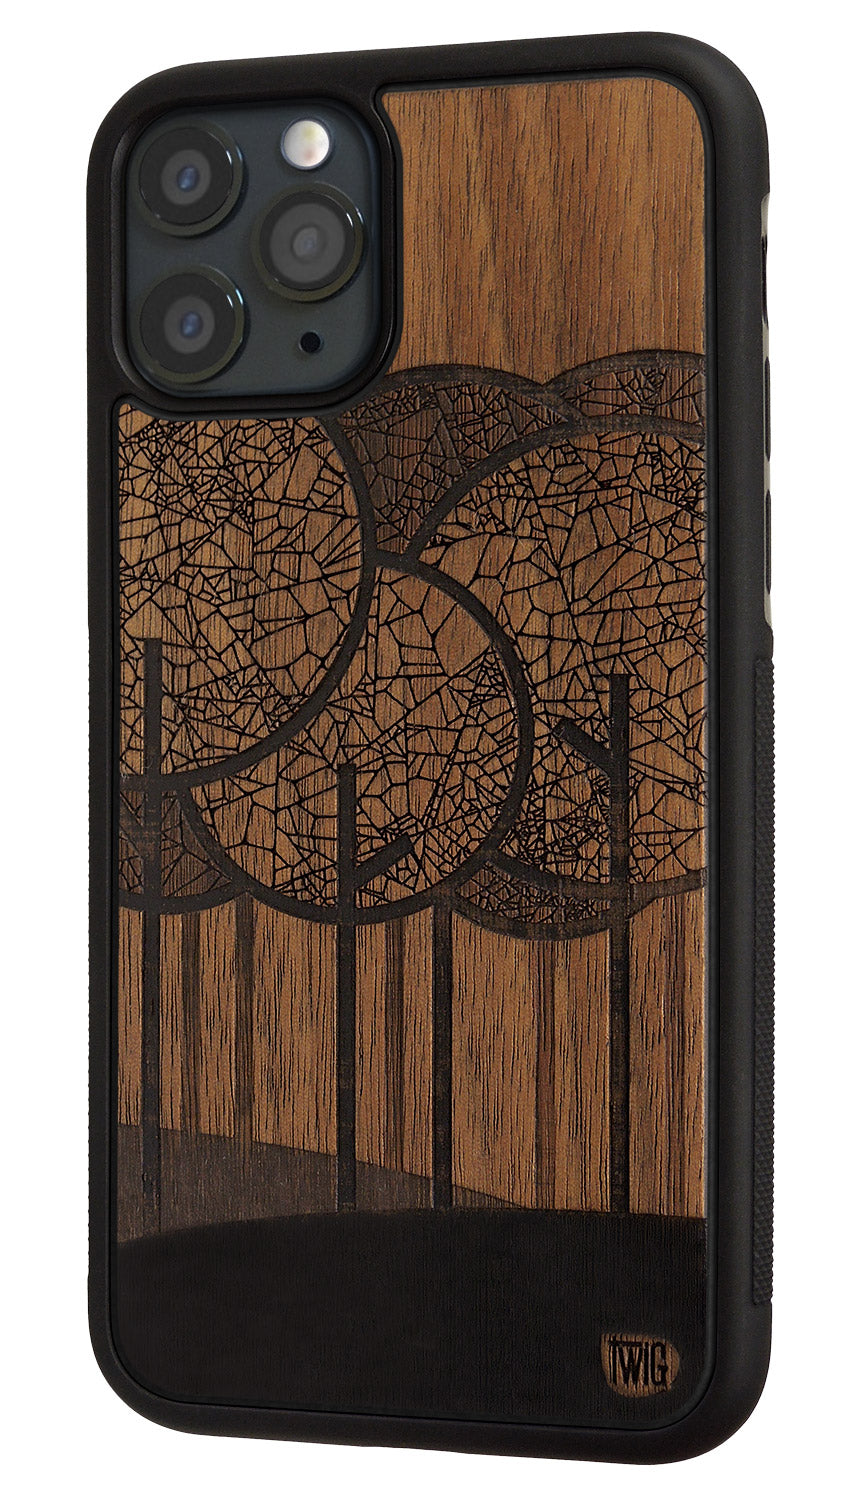 The Silent Grove - Walnut iPhone Case, iPhone Case - Twig Case Co.